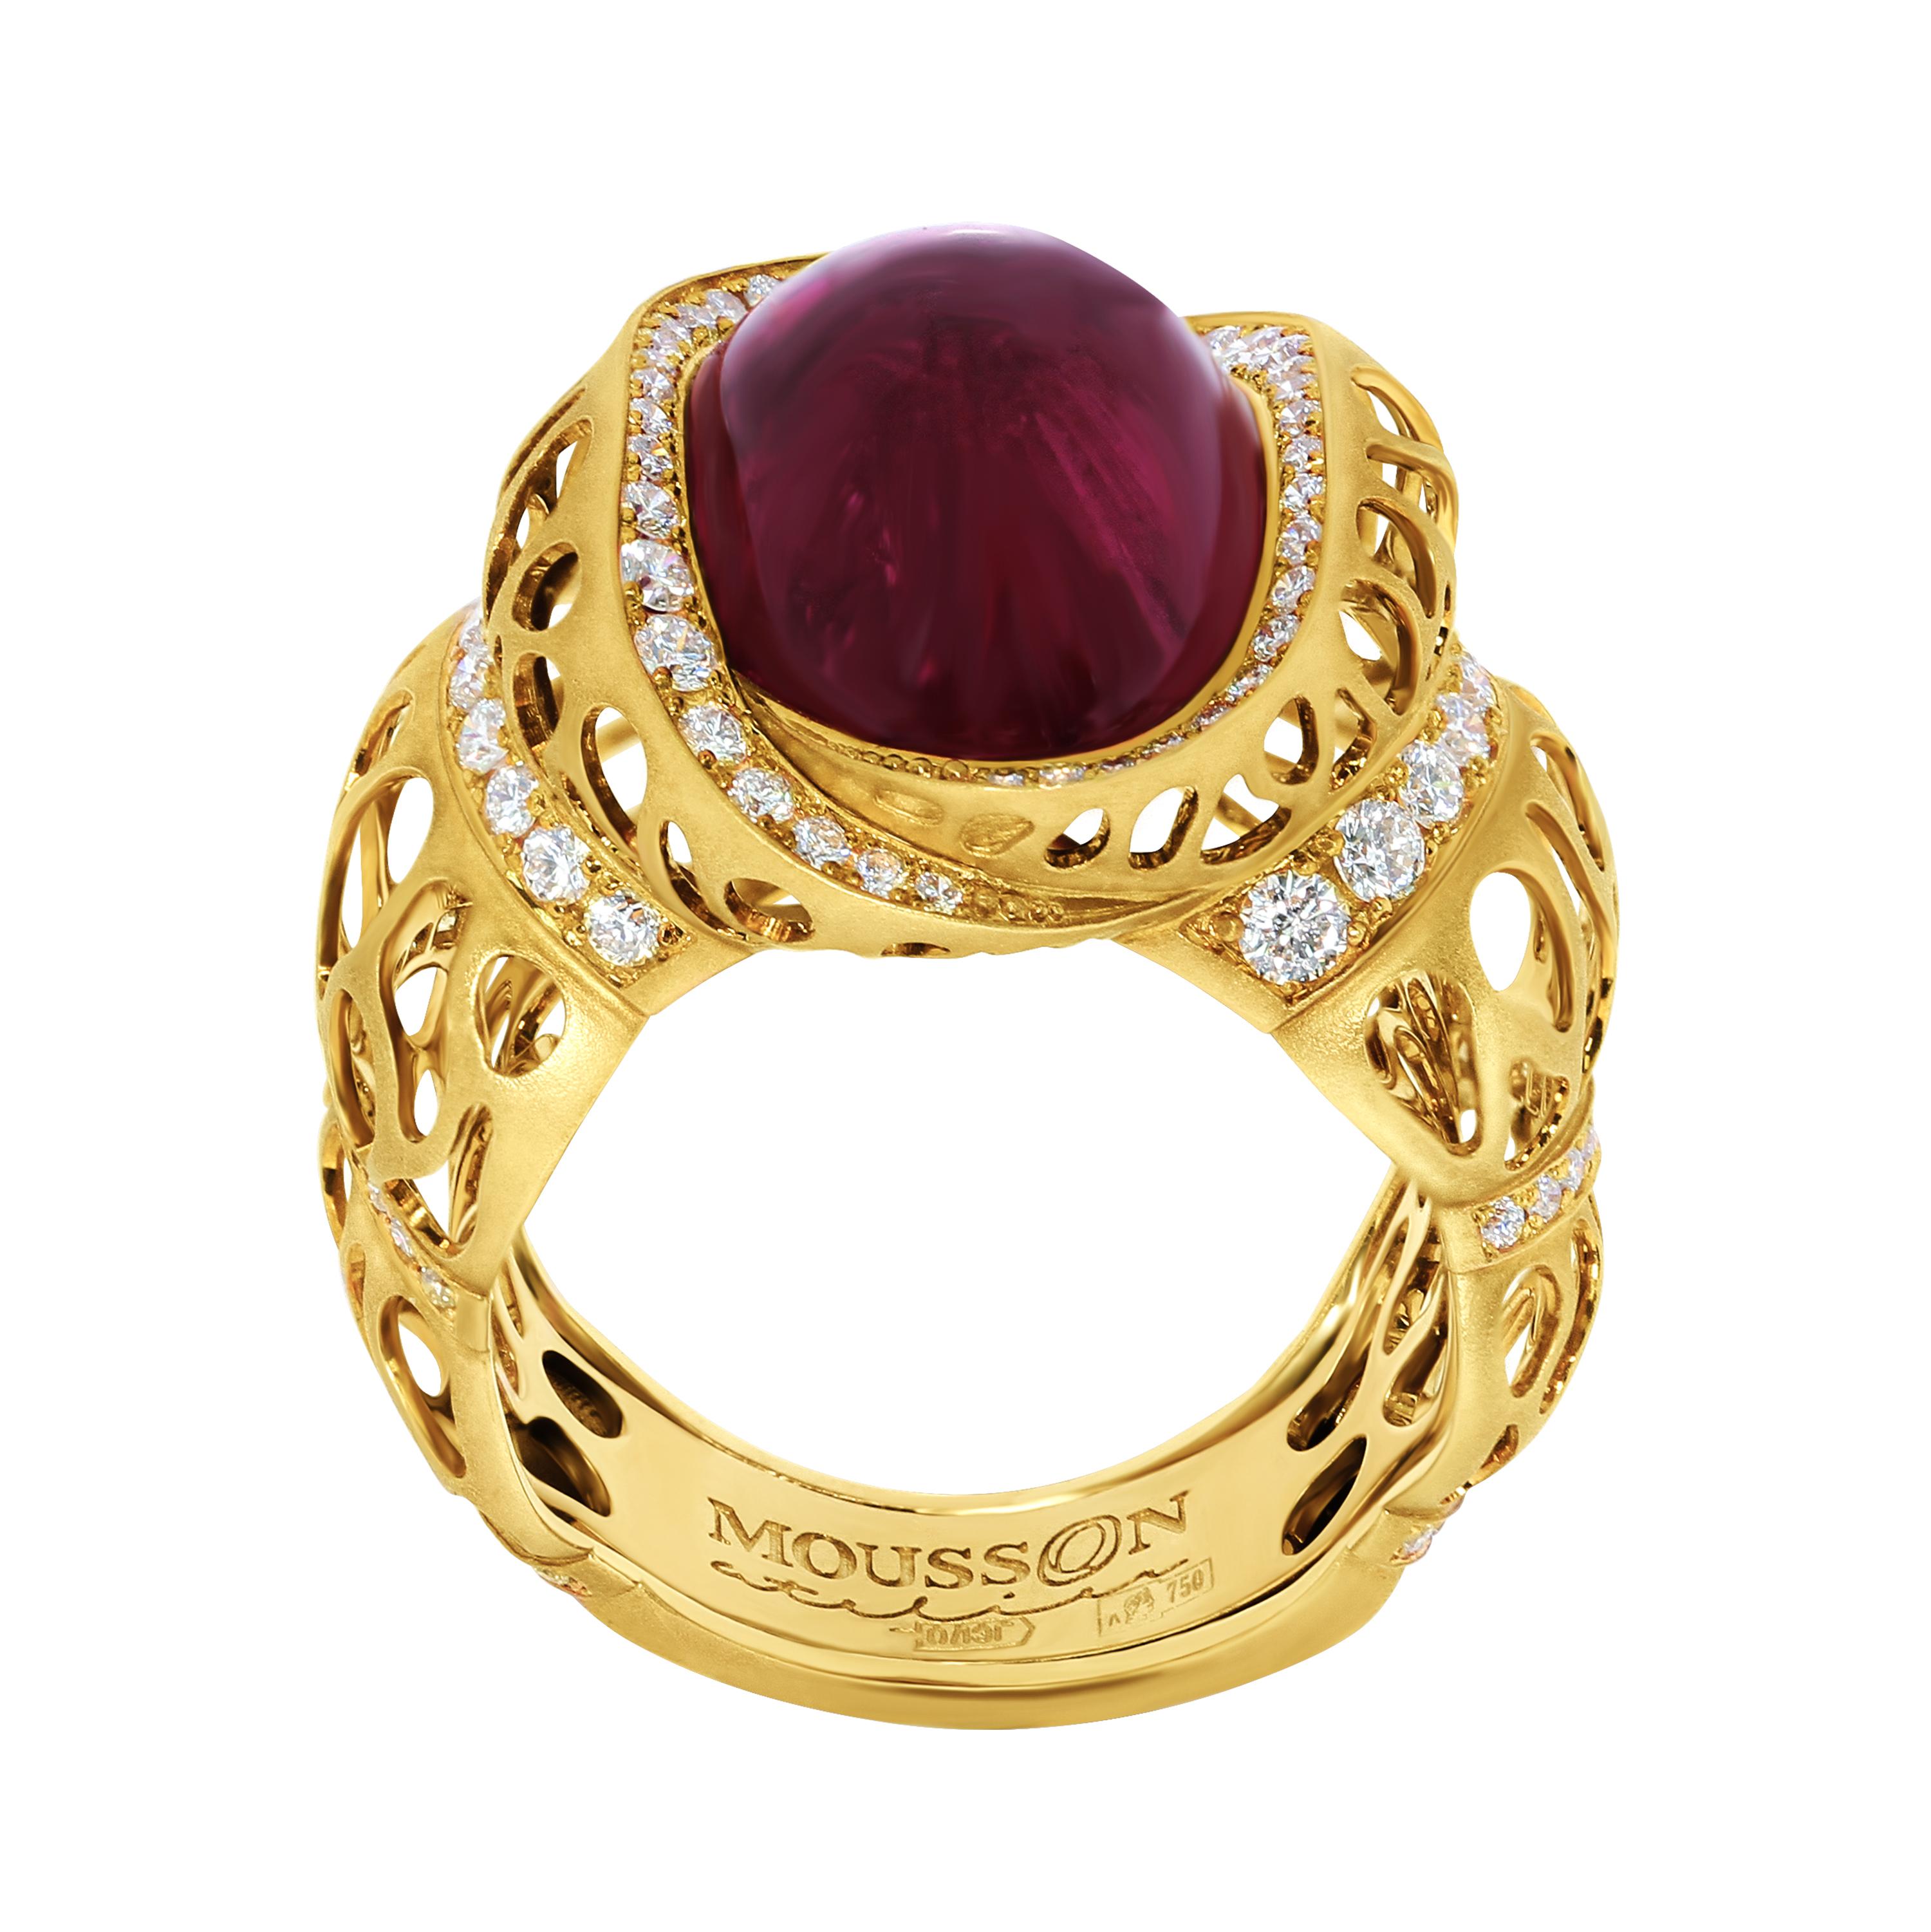 Rubellite 11.07 Carat Diamonds 18 Karat Yellow Gold Coral Reef Ring
Ring from the Coral Reef collection, where the distinctive feature is the shape of 18 Karat Yellow Gold, made in the form of coral reefs. The variety of colors in this Сollection is